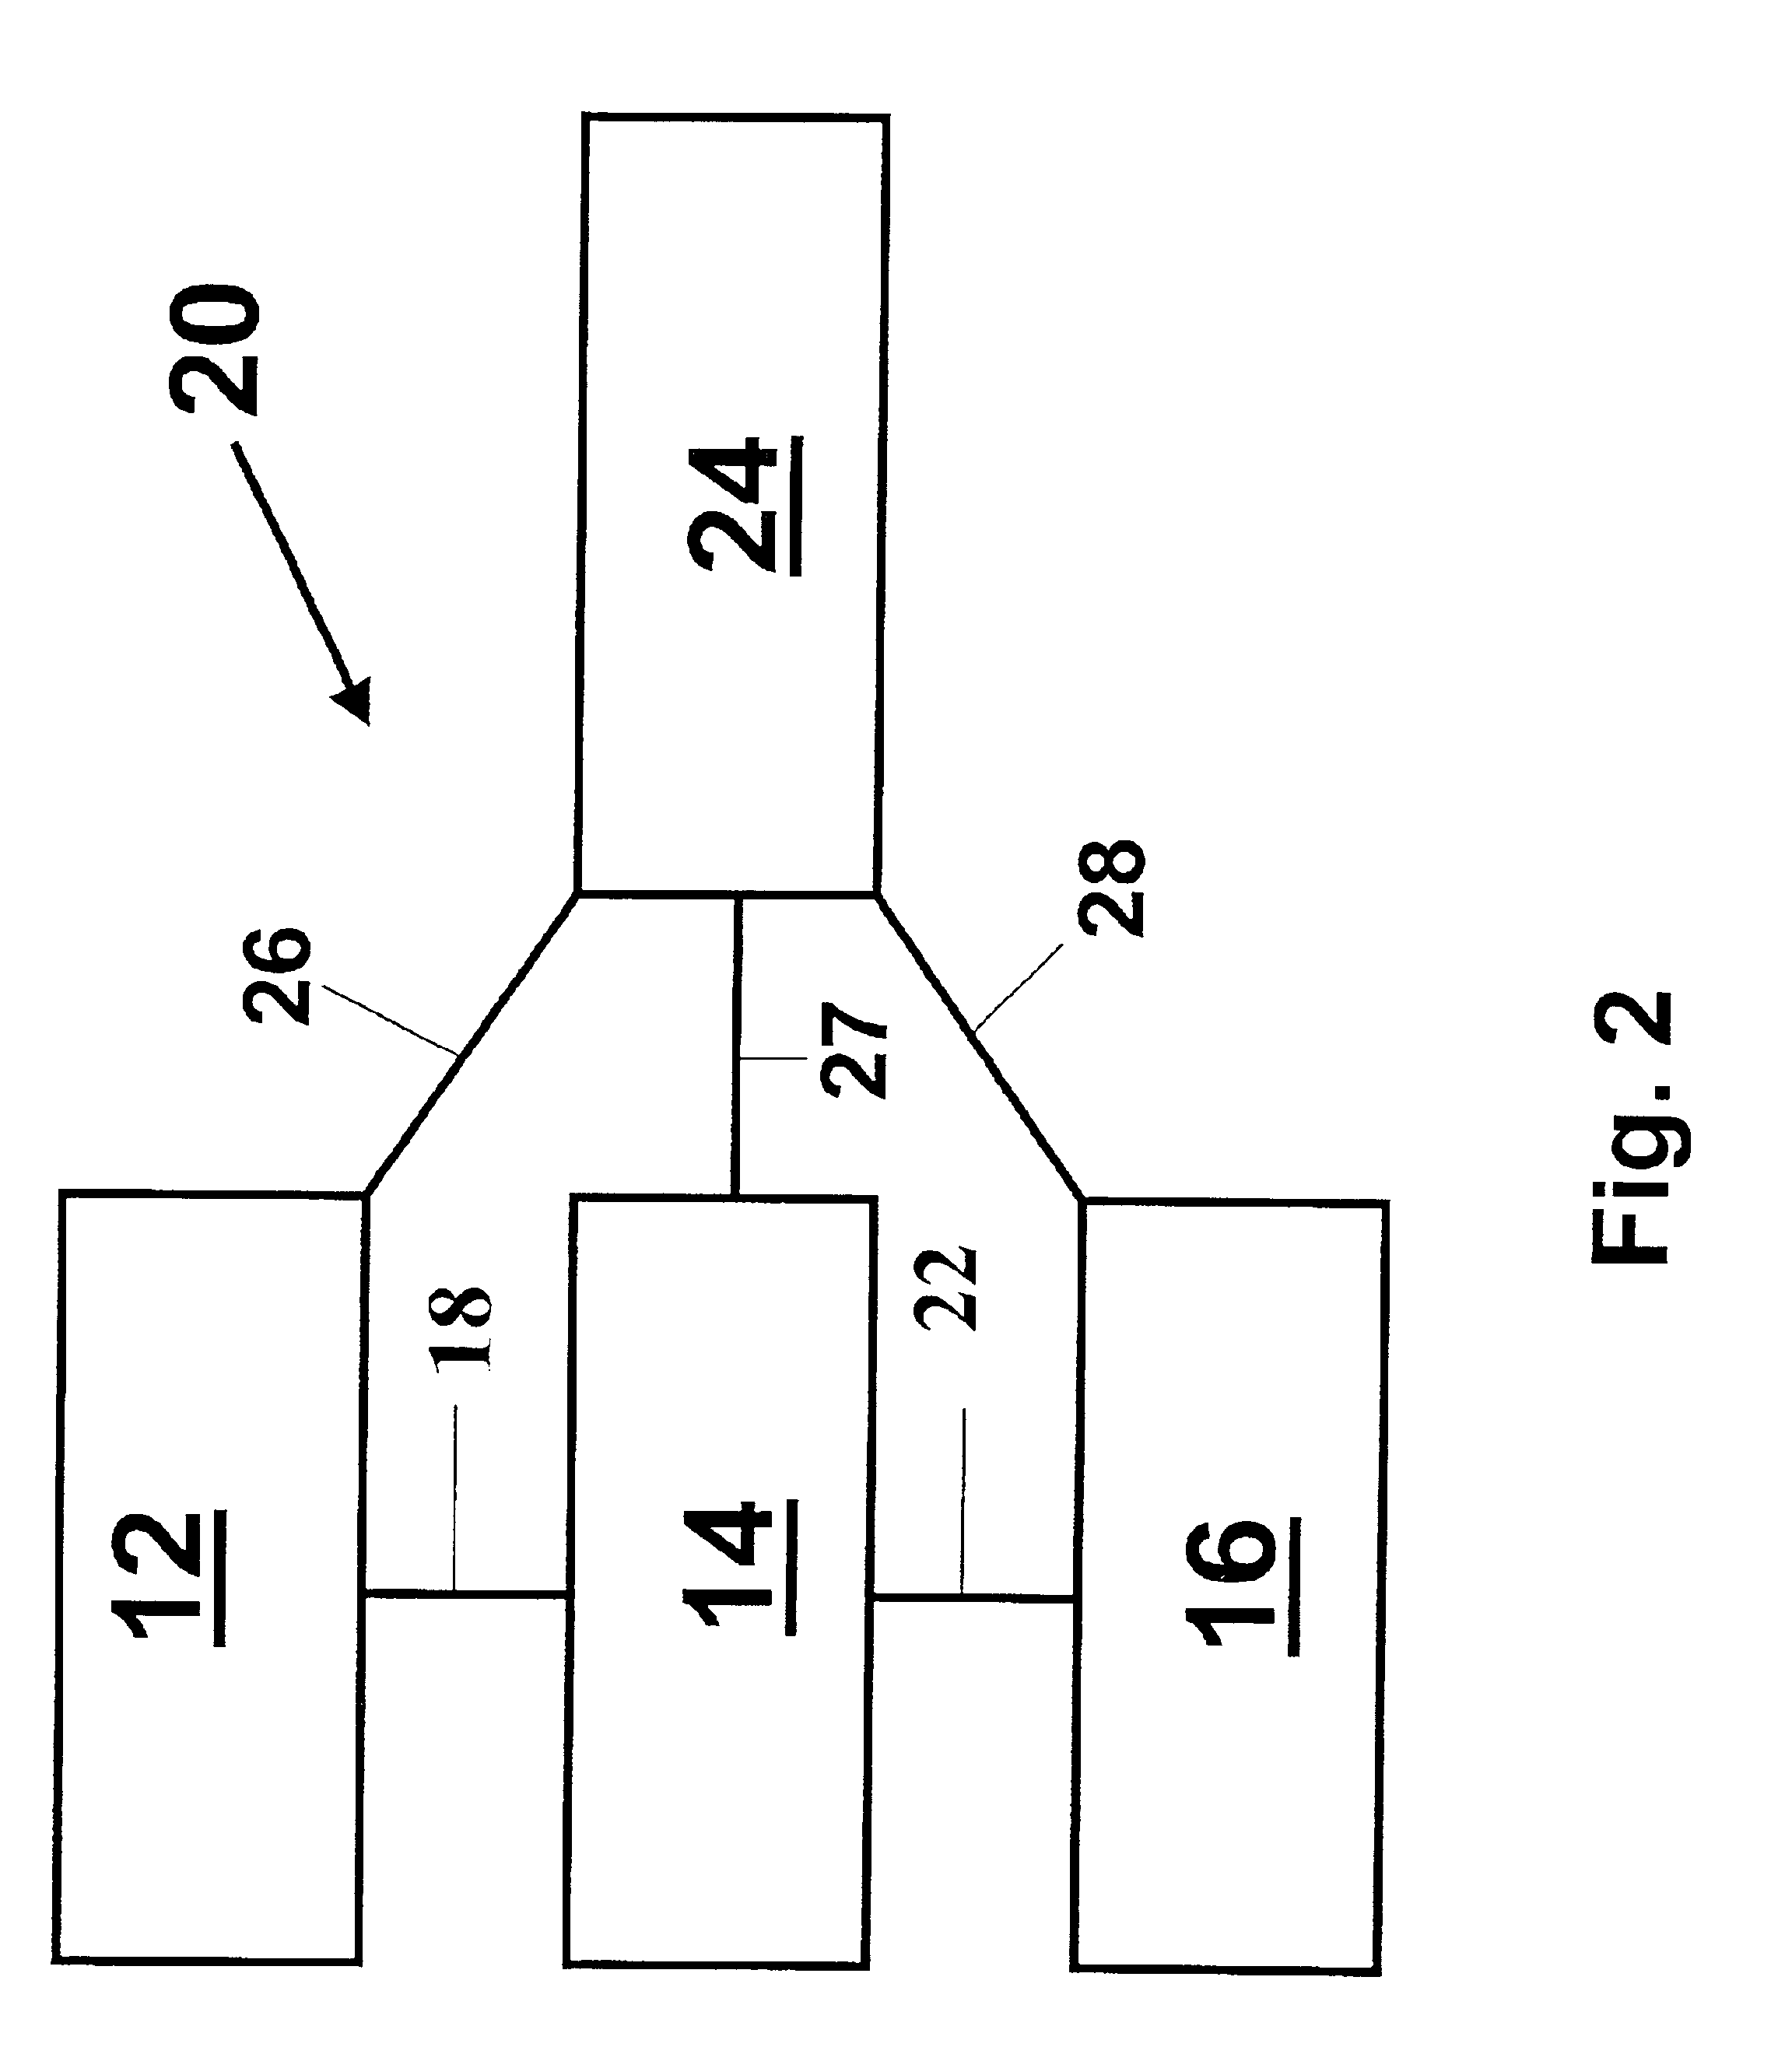 System and methods for imaging within a body lumen